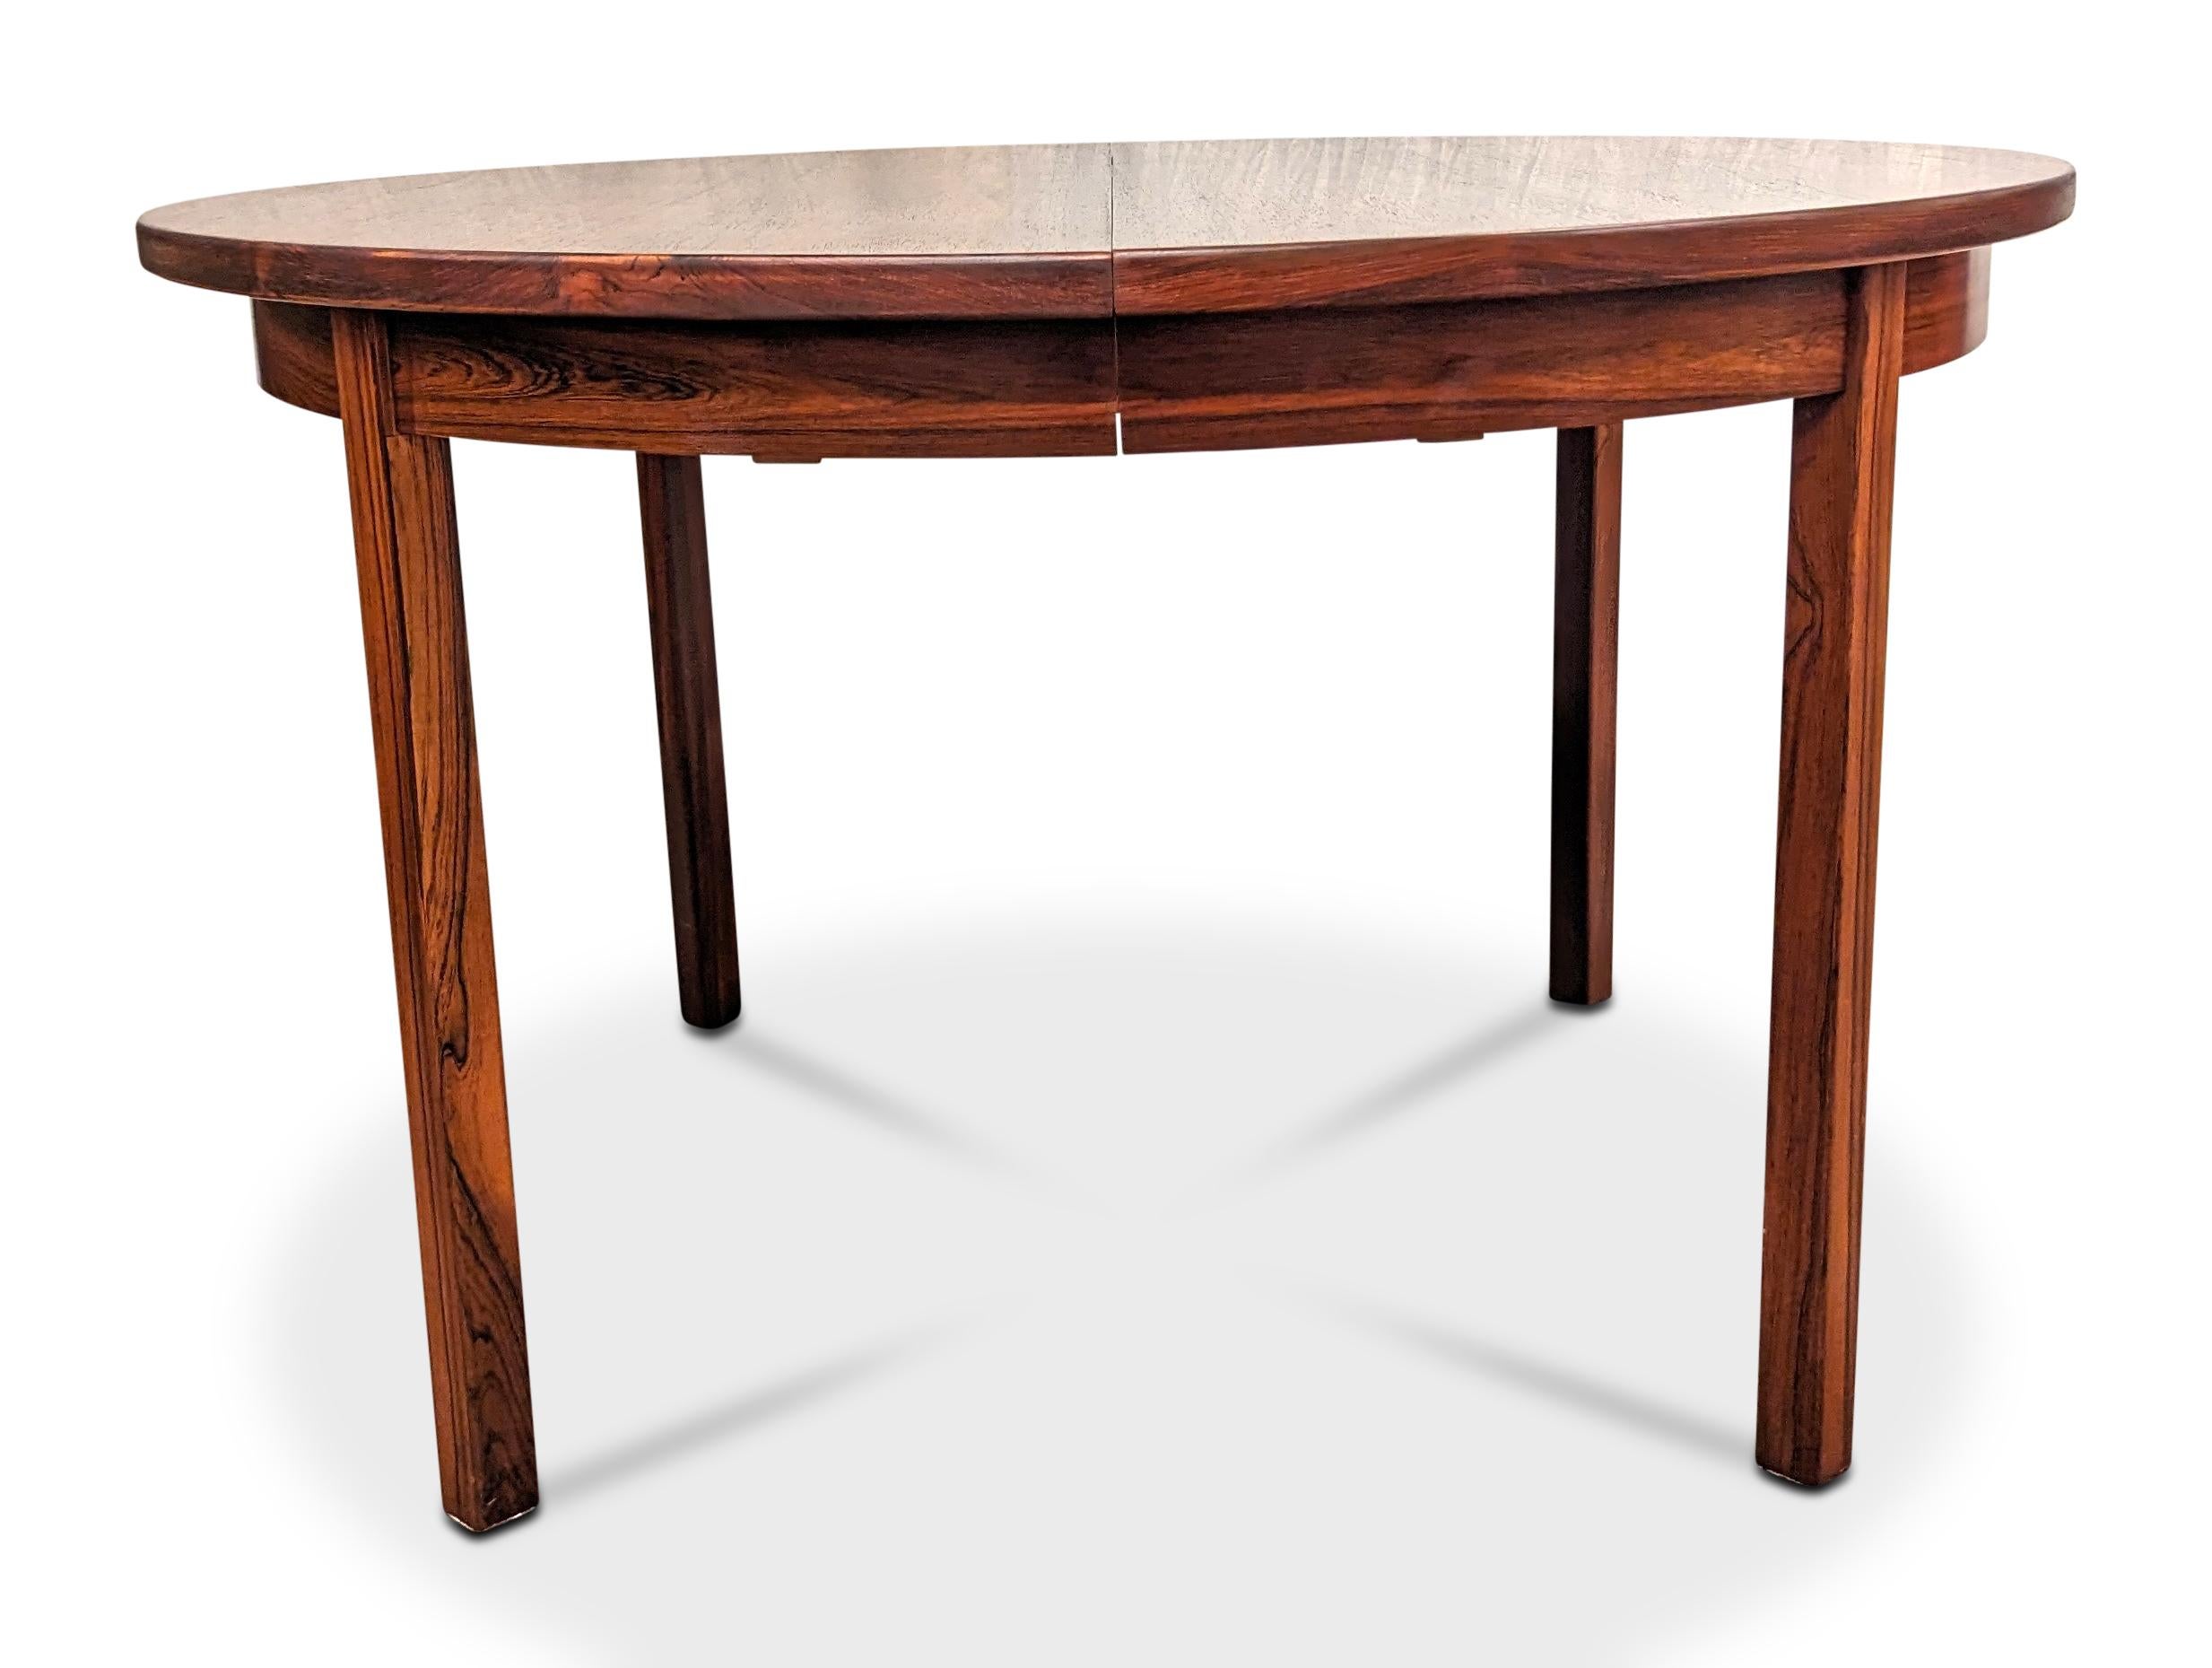 Vintage Danish mid-century modern, made in the 1950's - Recently refurbished

Brazilian rosewood have been illegal to harvest since 1961 and on the U.N. CITES list of endangered spices since 1992. For each piece of rosewood furniture we import to